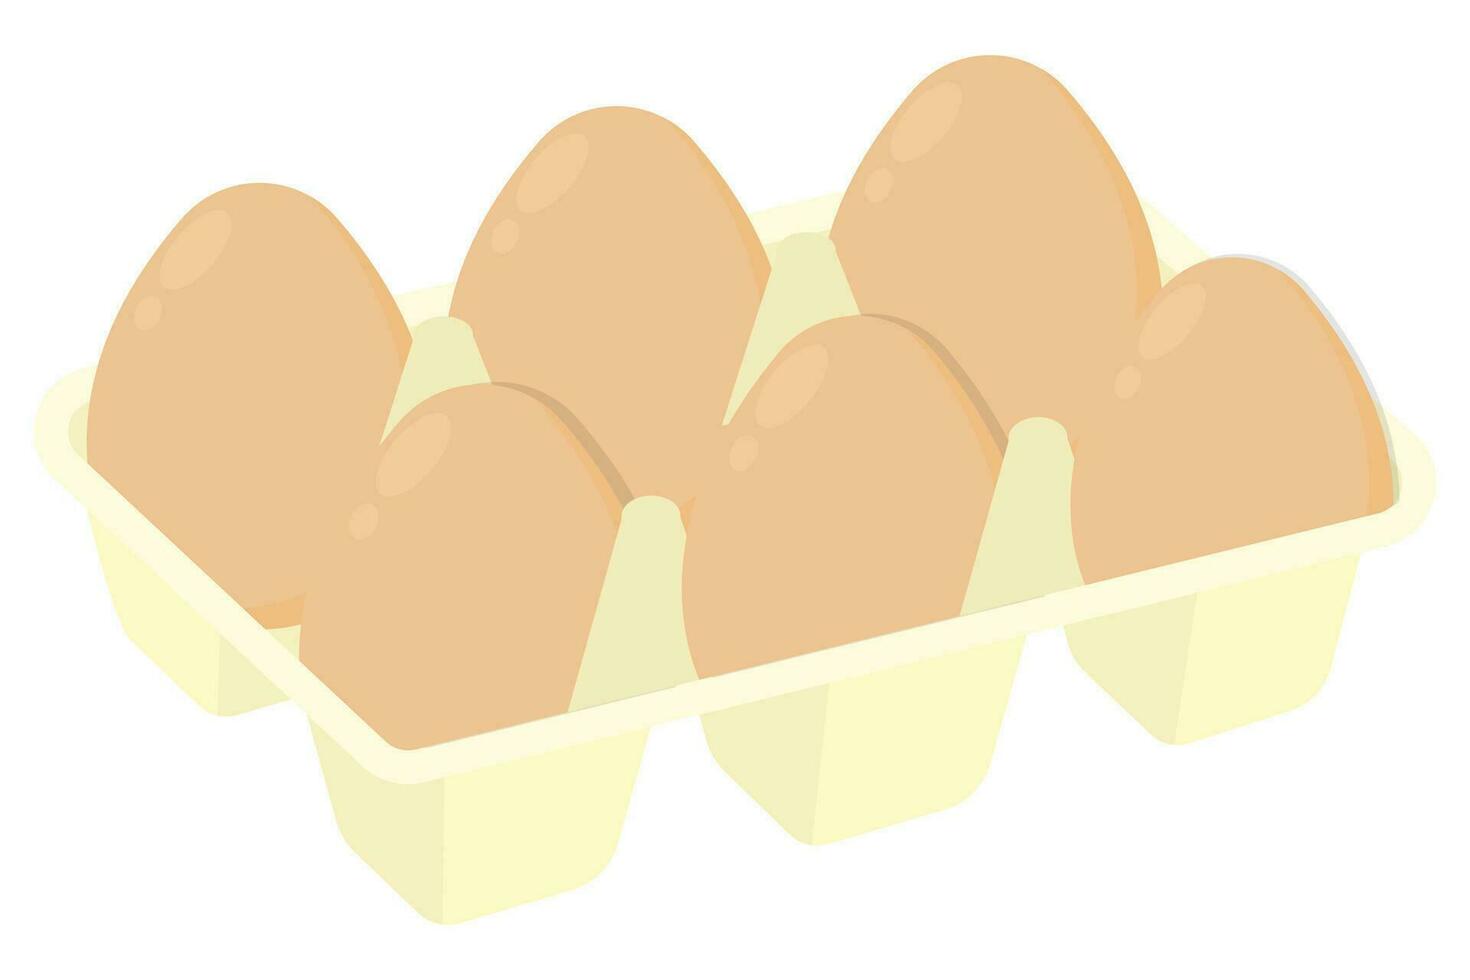 Isolated eggs on carton pack. Eggs container box cooking food cardboard vector